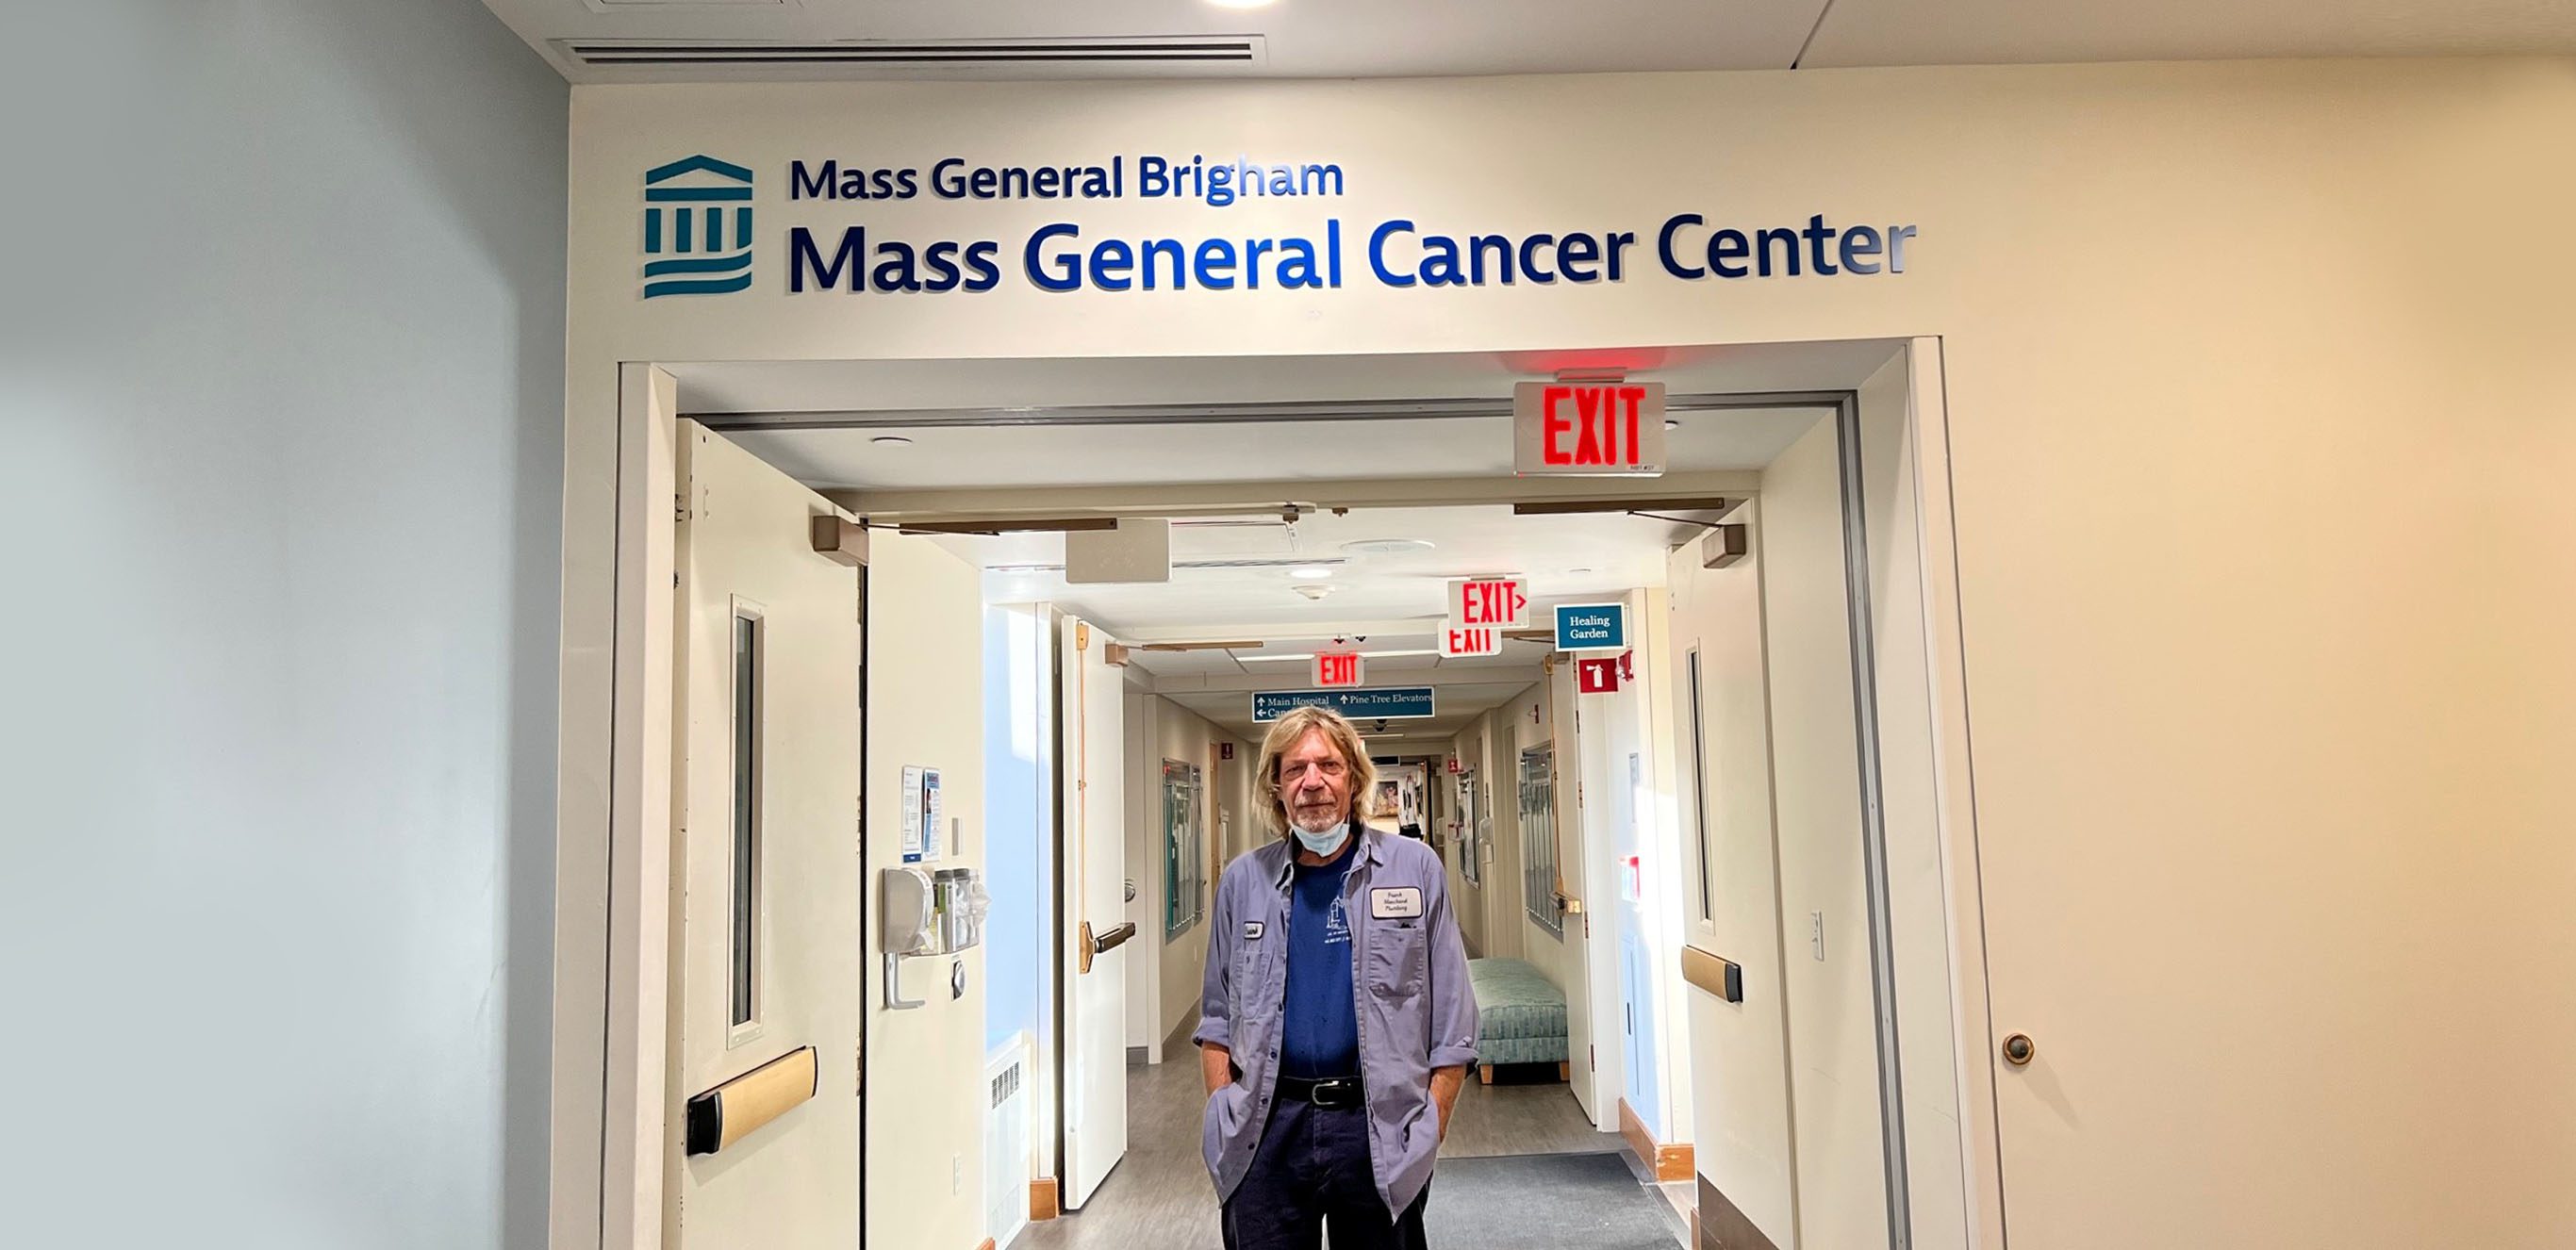 Man standing in hallway with Mass General Cancer Center written above the doorframe